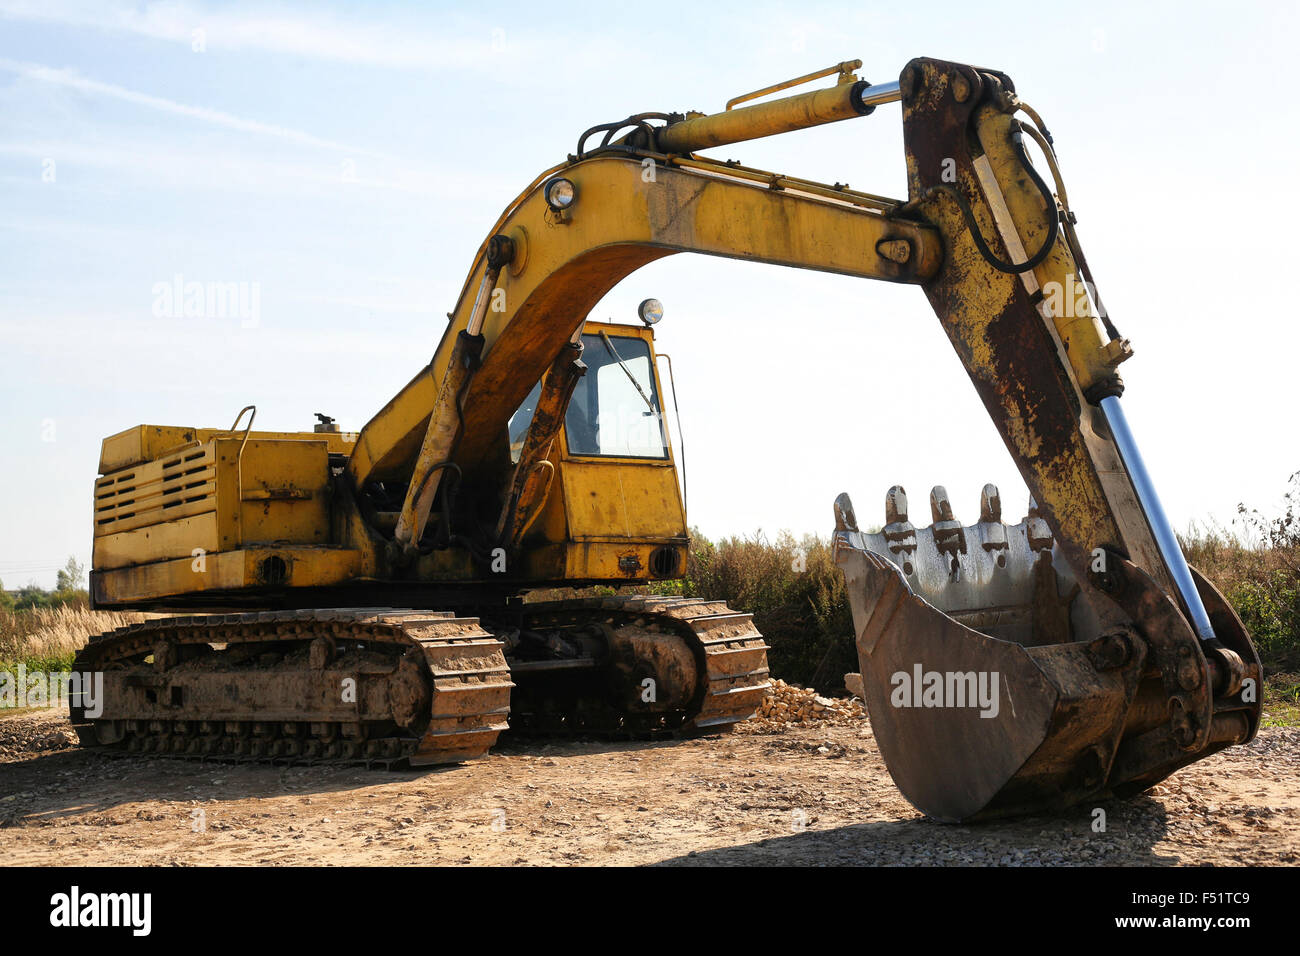 The old yellow track excavator thrown into a field. Stock Photo